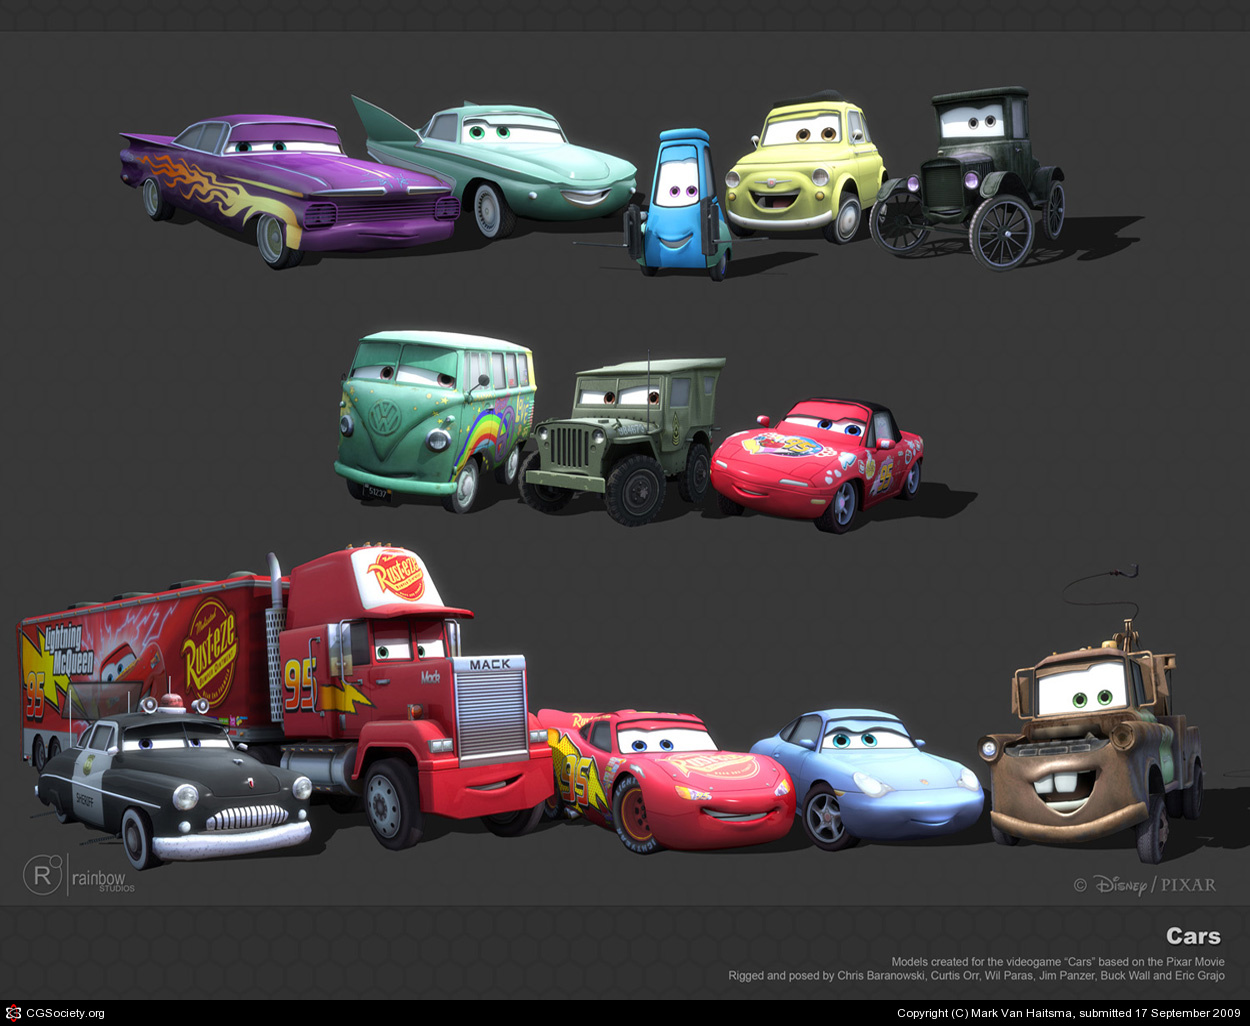 cars 3 video game download free